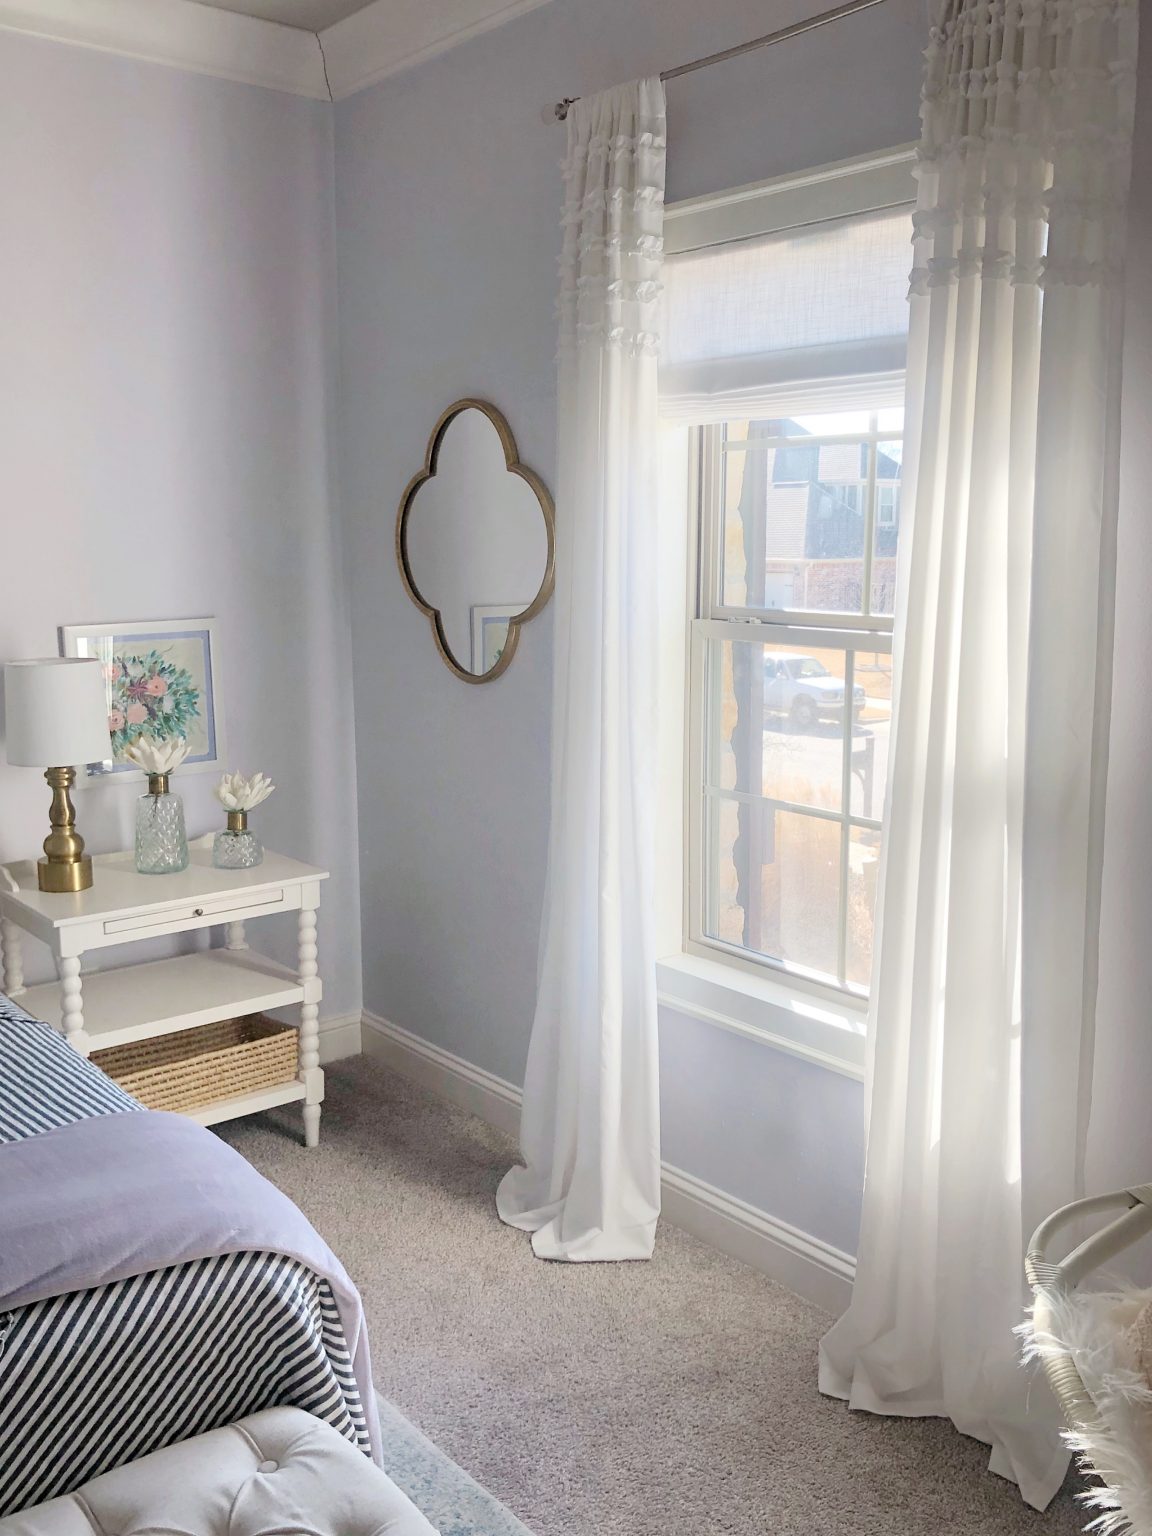 Kids Bedroom Reveal with New Roman Shades - Our Vintage Nest